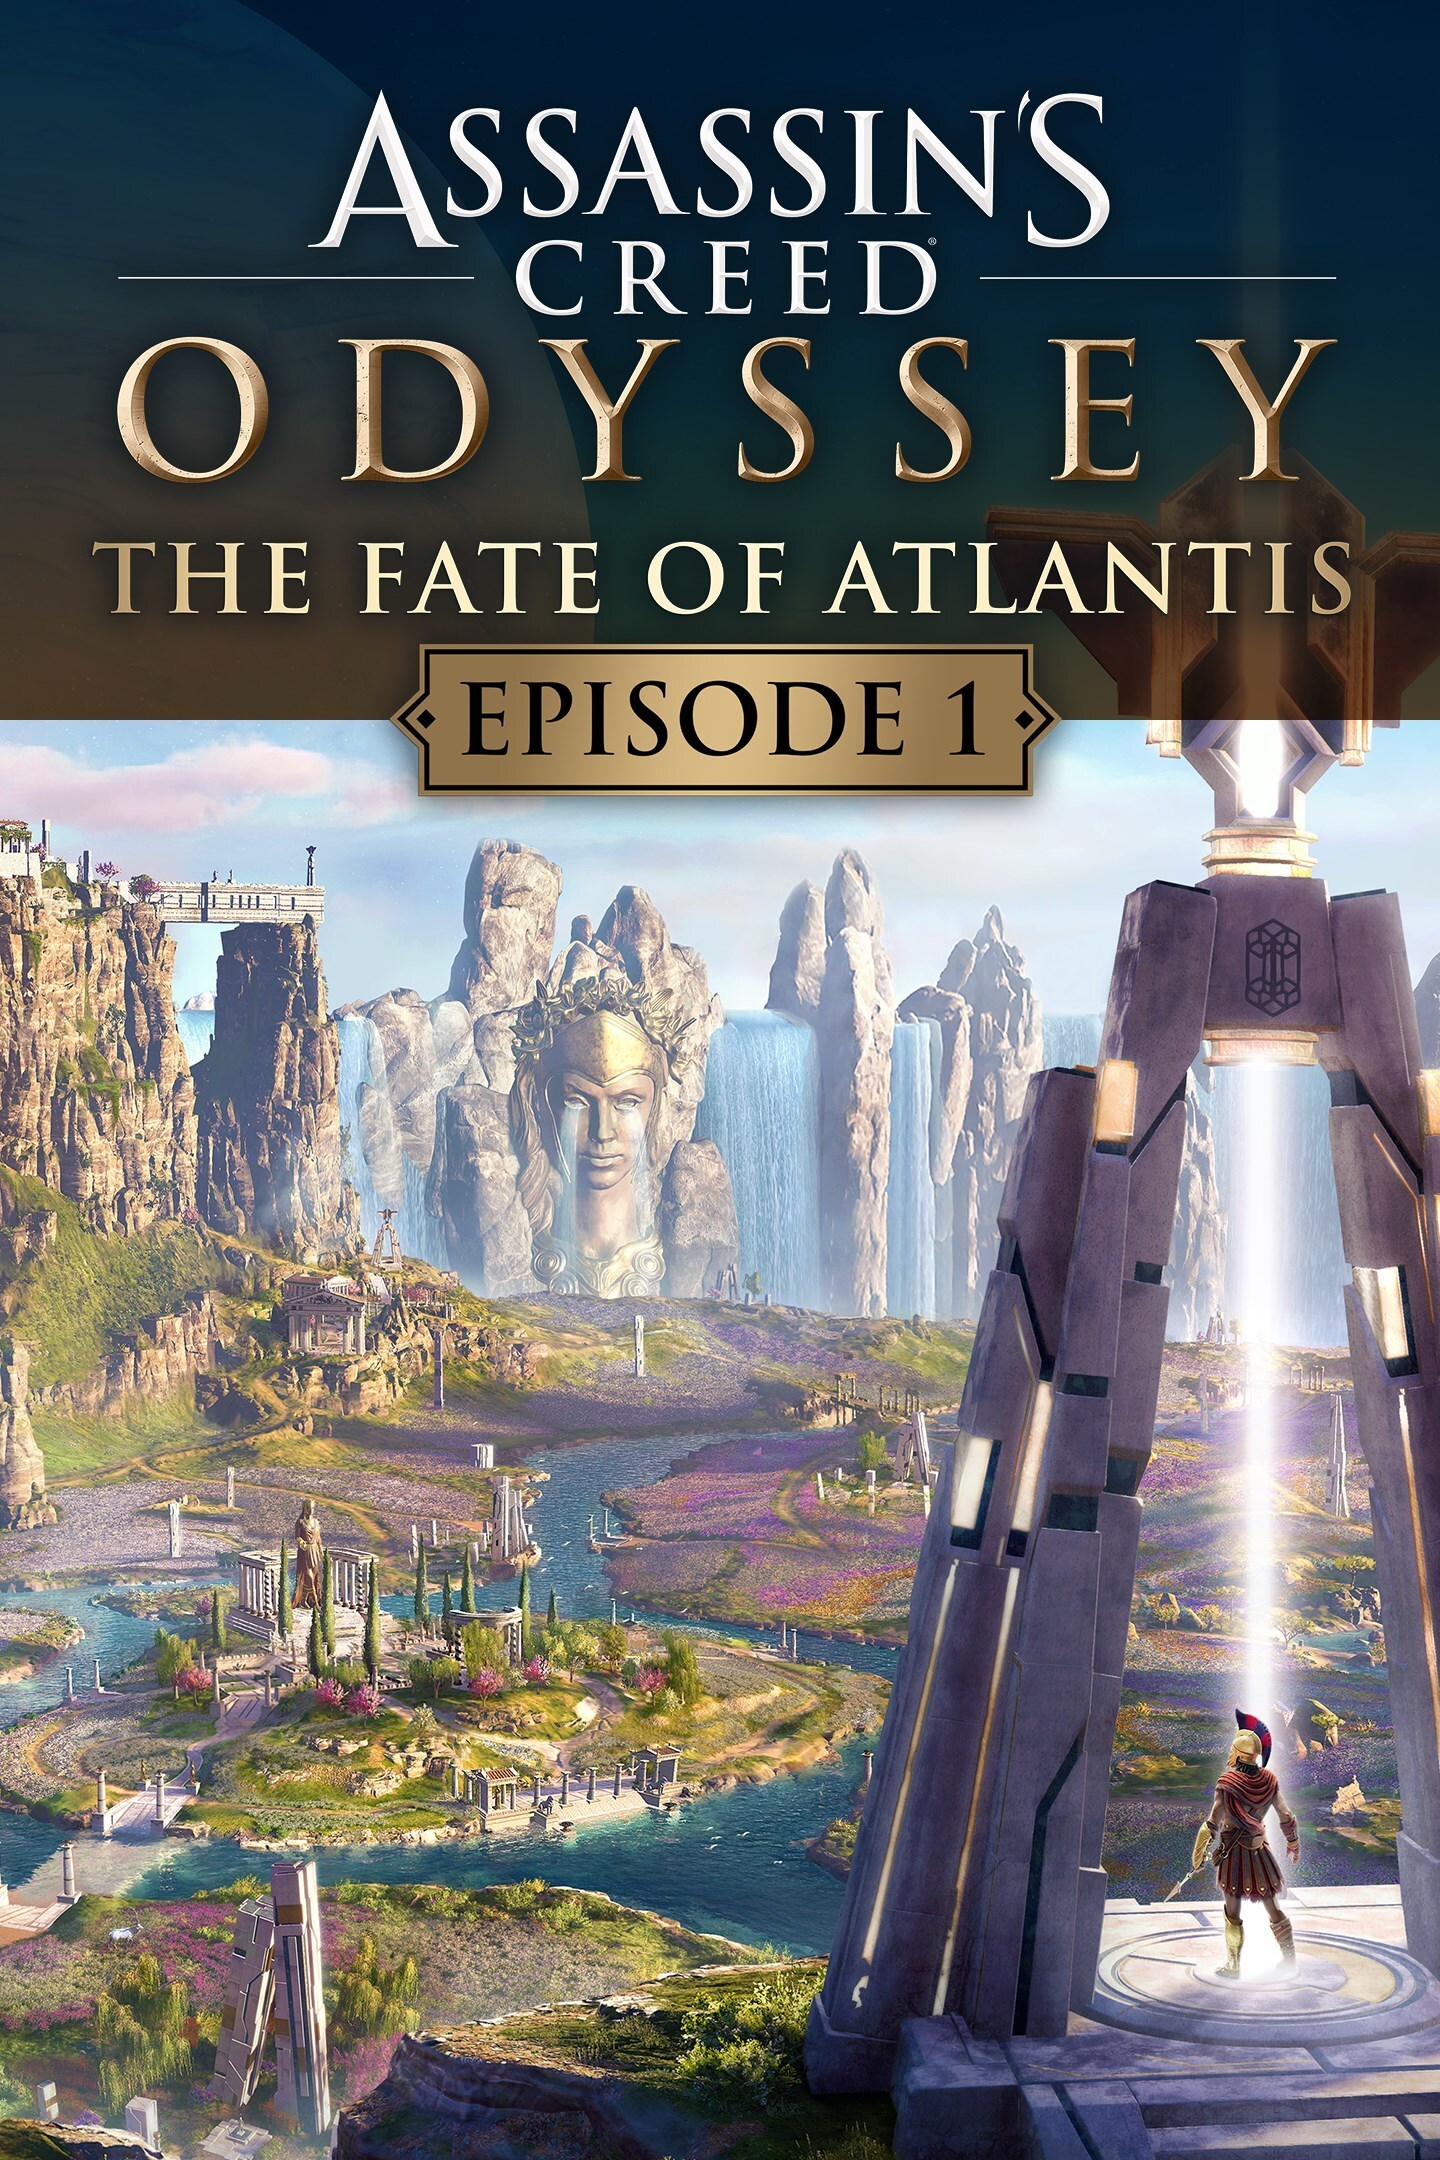 Assassin's Creed Odyssey - The Fate of Atlantis - Episode 1: Fields of Elysium